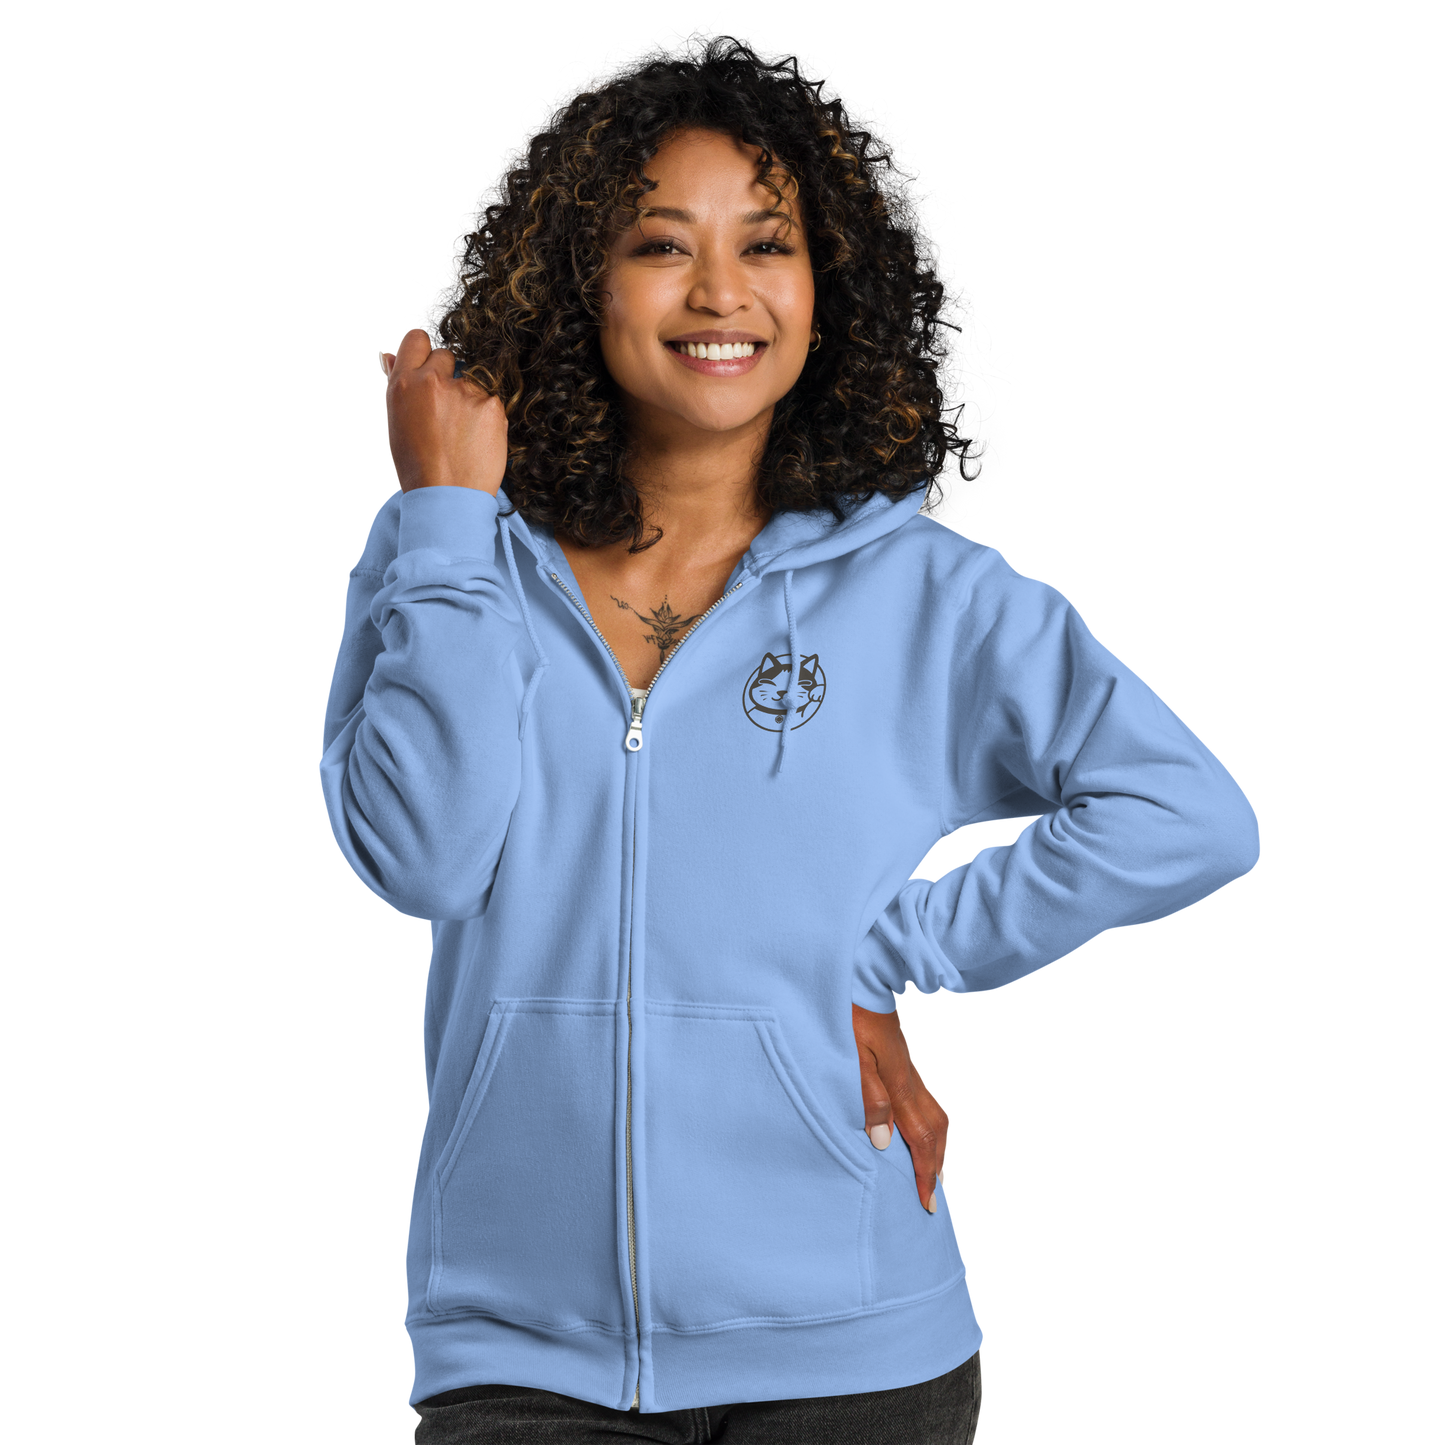 Baby Blue Lucky Cat Couture Zip-Up Hoodie